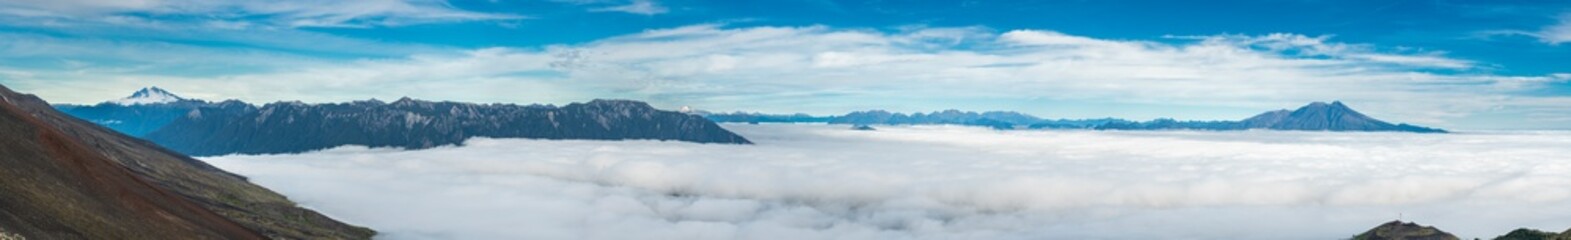 Amazing panoramic view from Osorno Volcano to an awe sea of clouds scenery on an amazing forest with Patagonia mountain range on the far distance dominated by Cerro Tronador mountain on the left